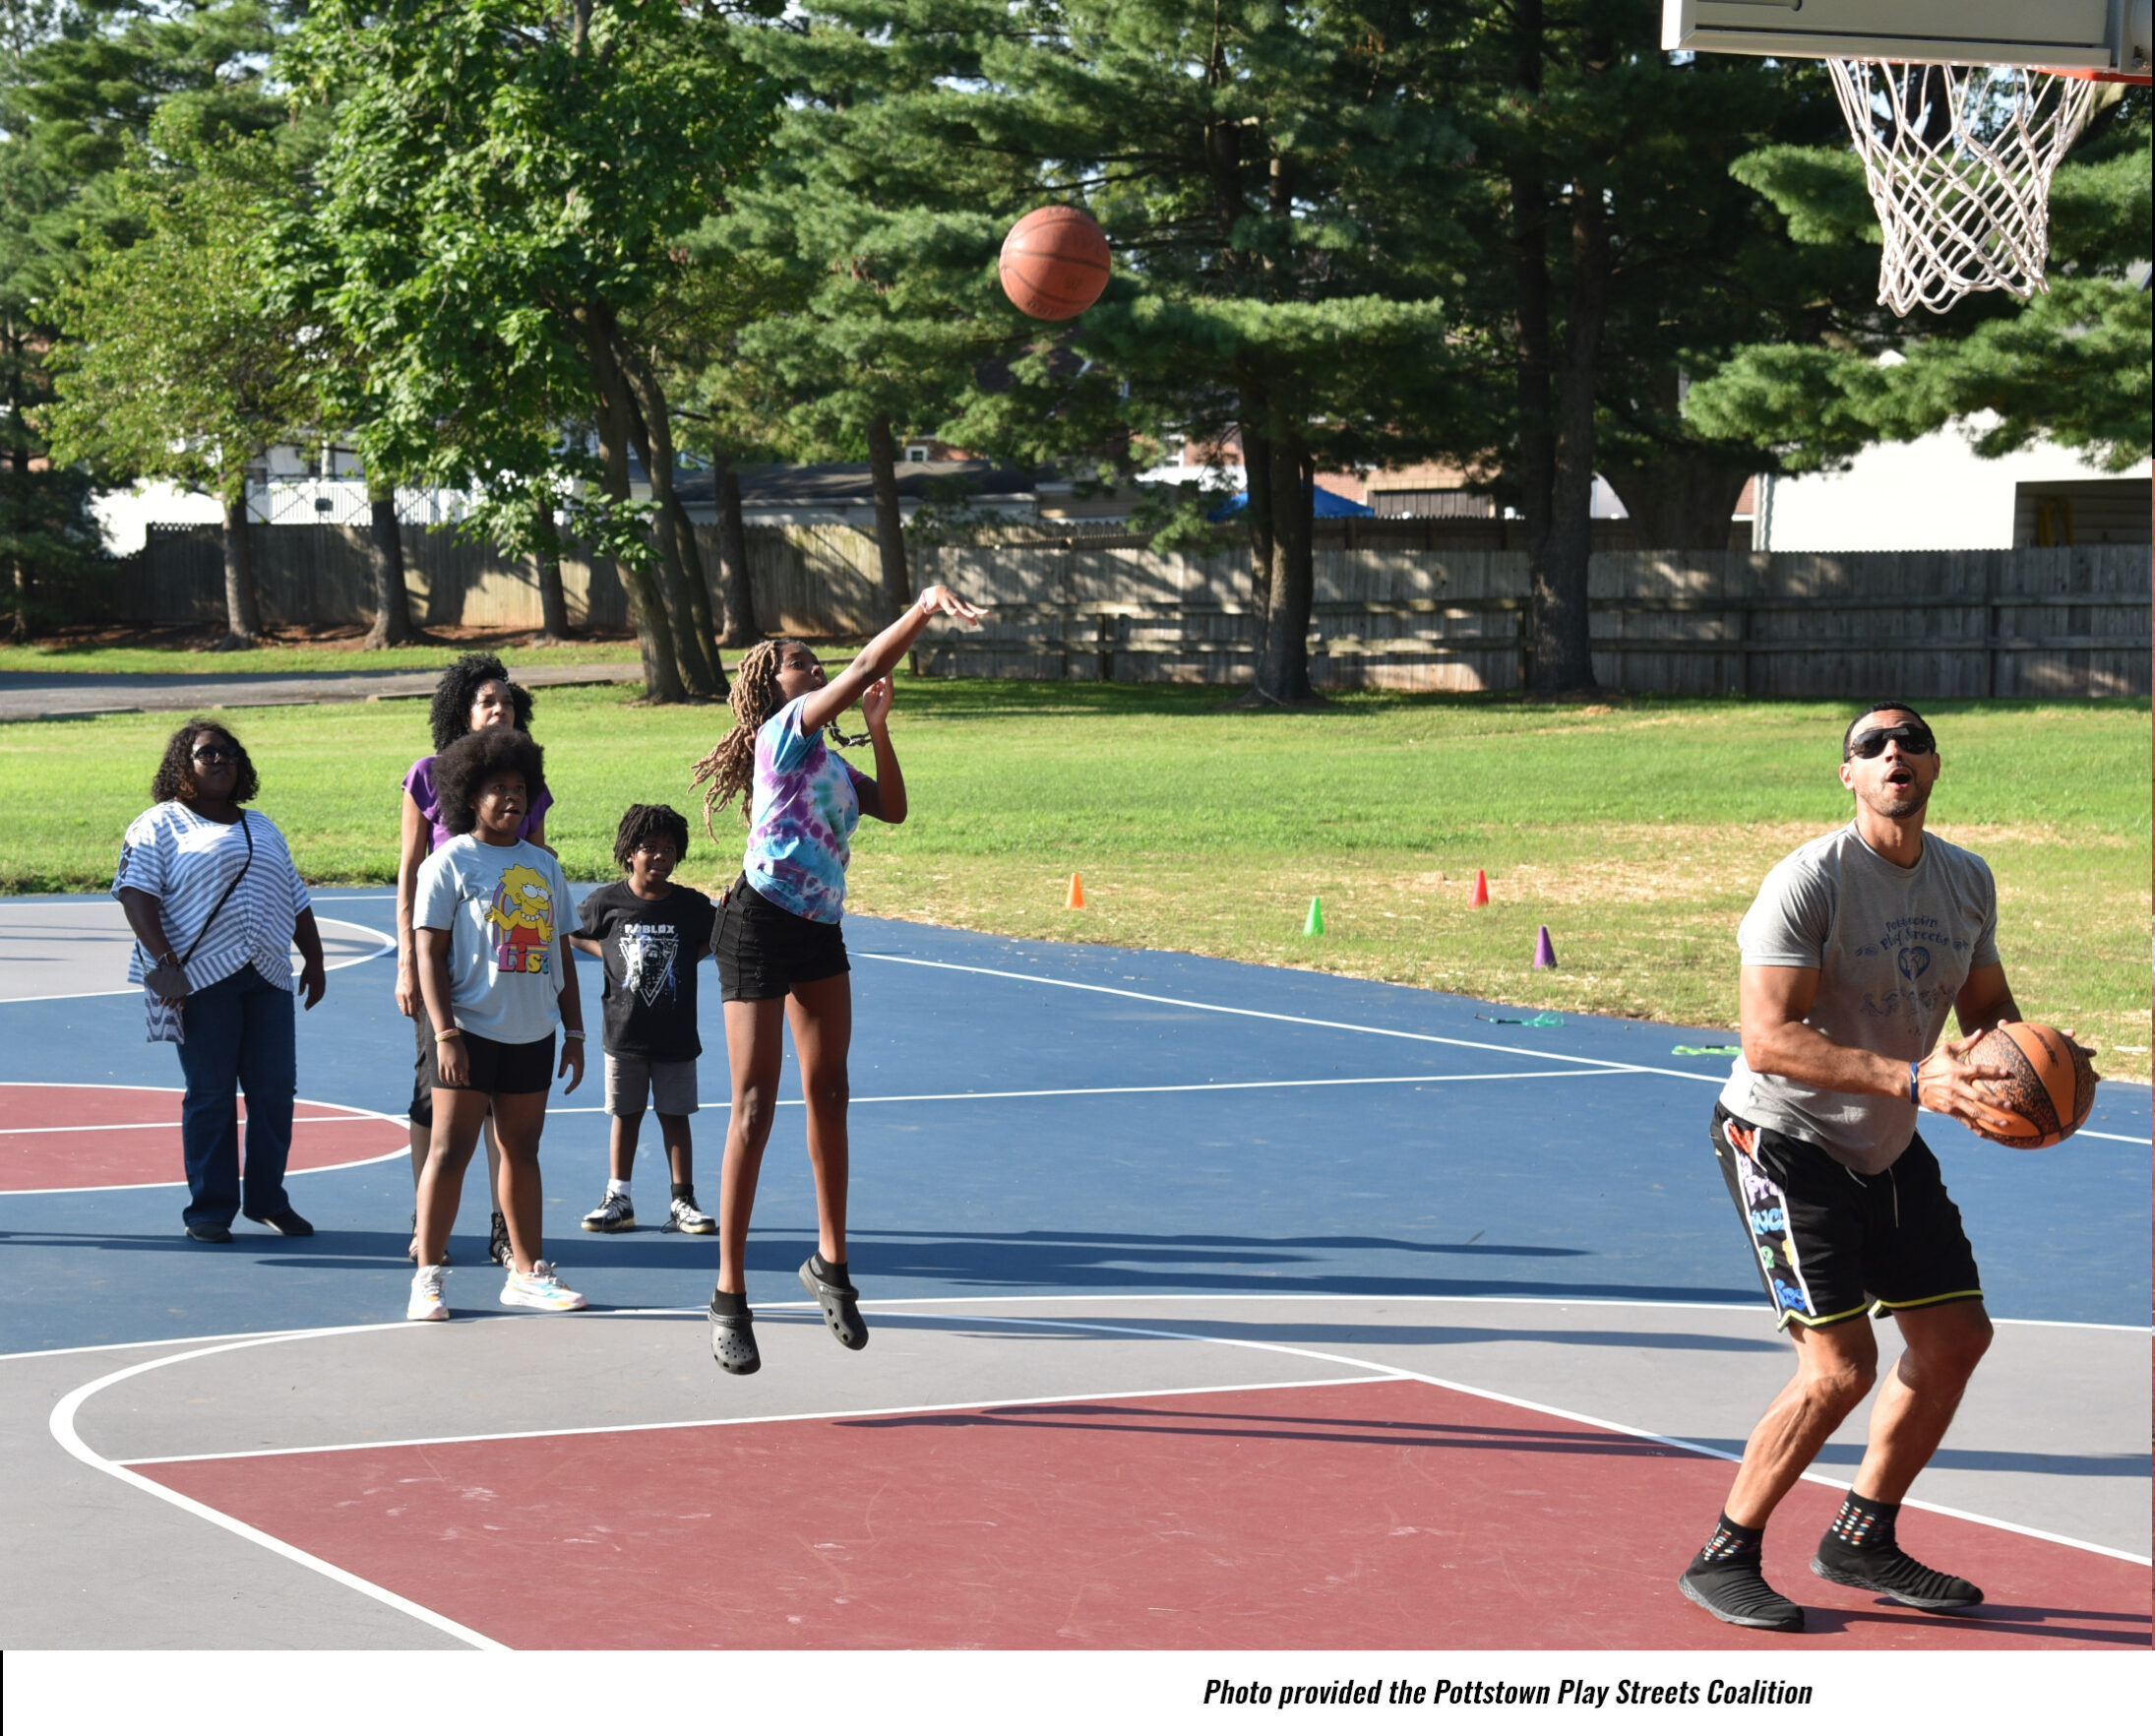 Borough ‘Play Streets’ Provide Fun, Safe Places to Play